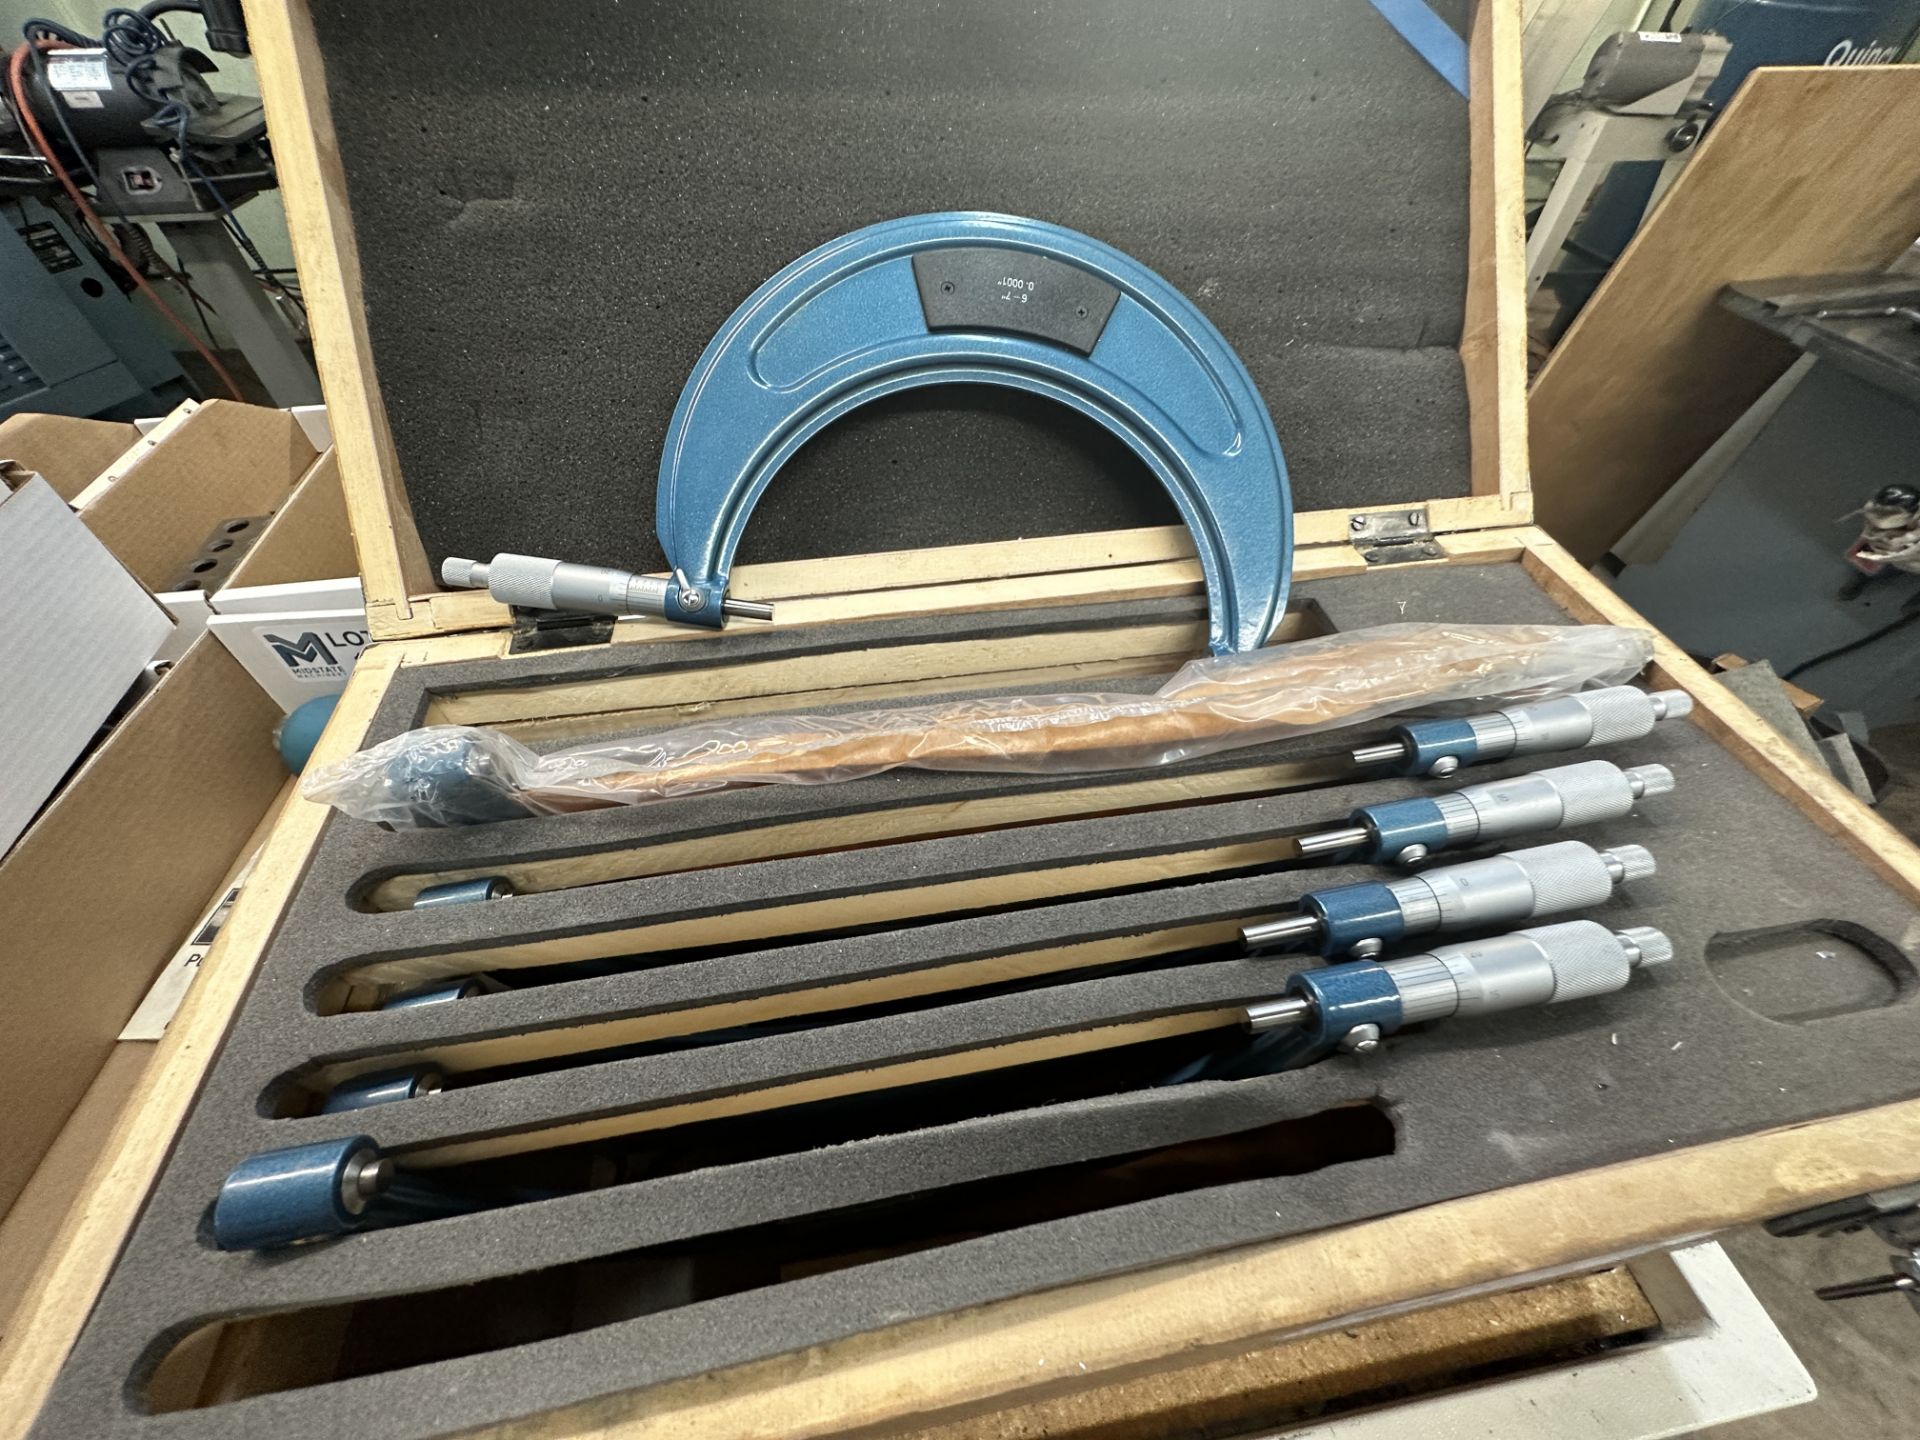 6 "- 12" Outside Micrometer Set W/ Set gages